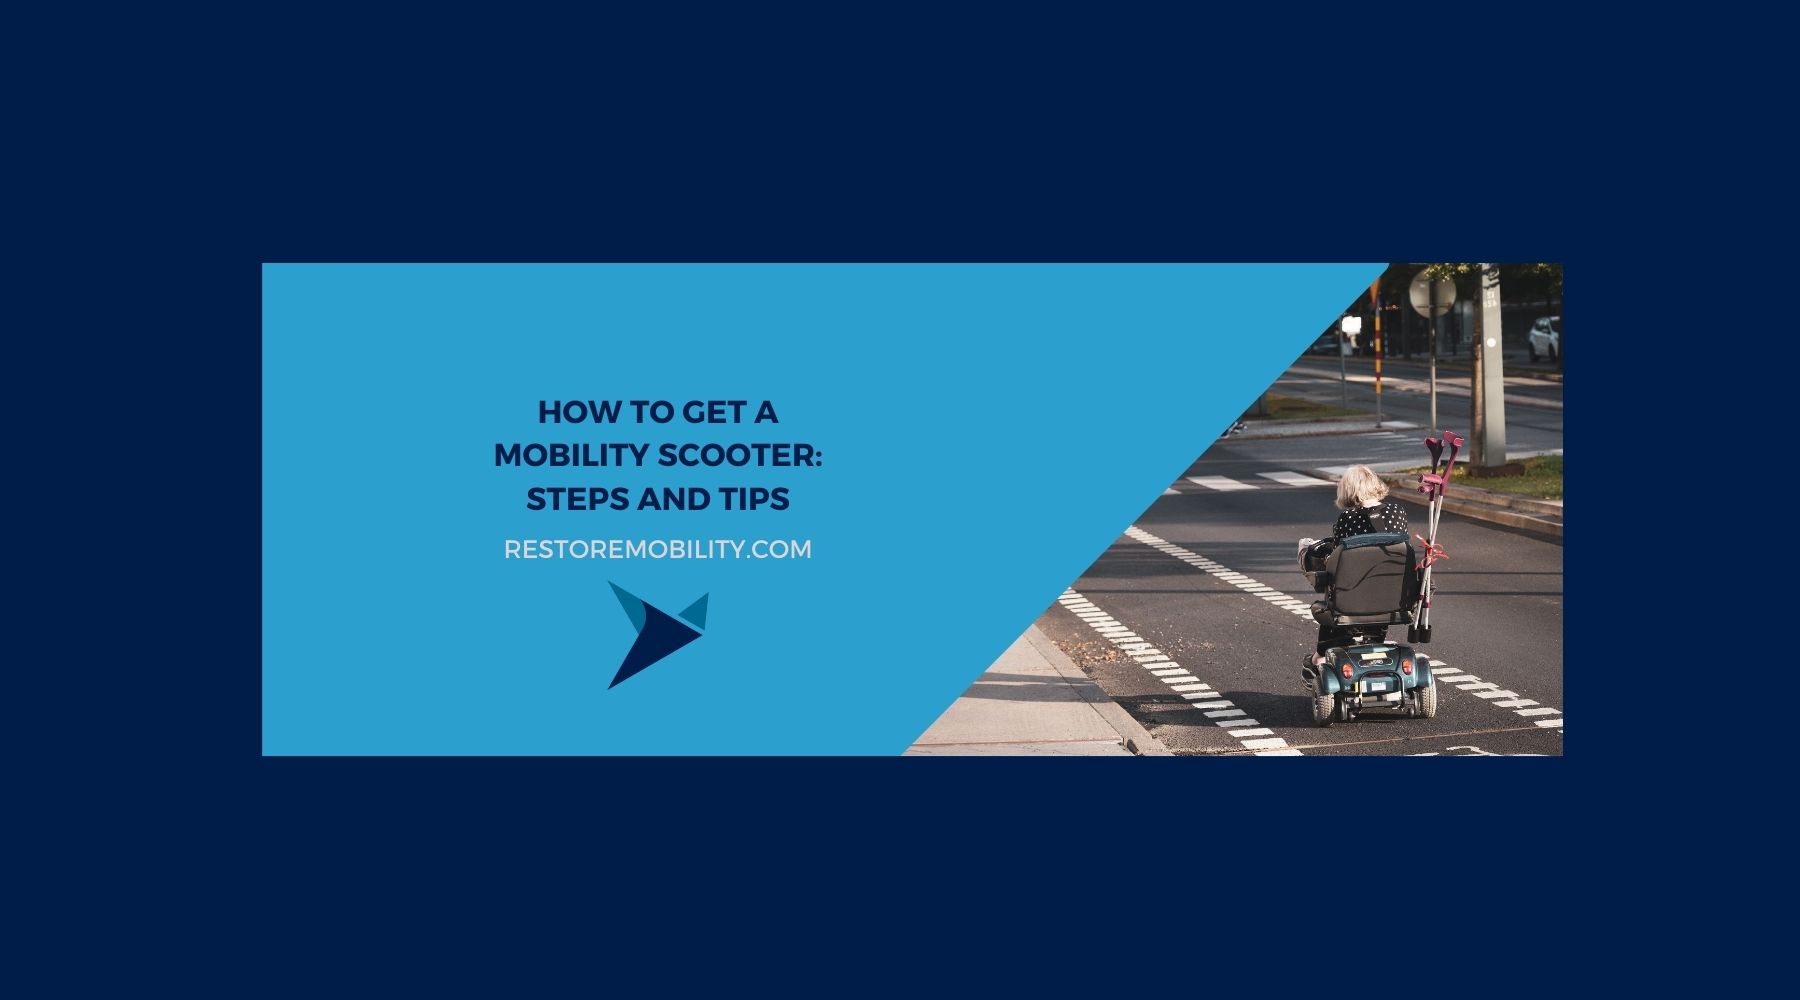 How to Get a Mobility Scooter: Steps and Tips